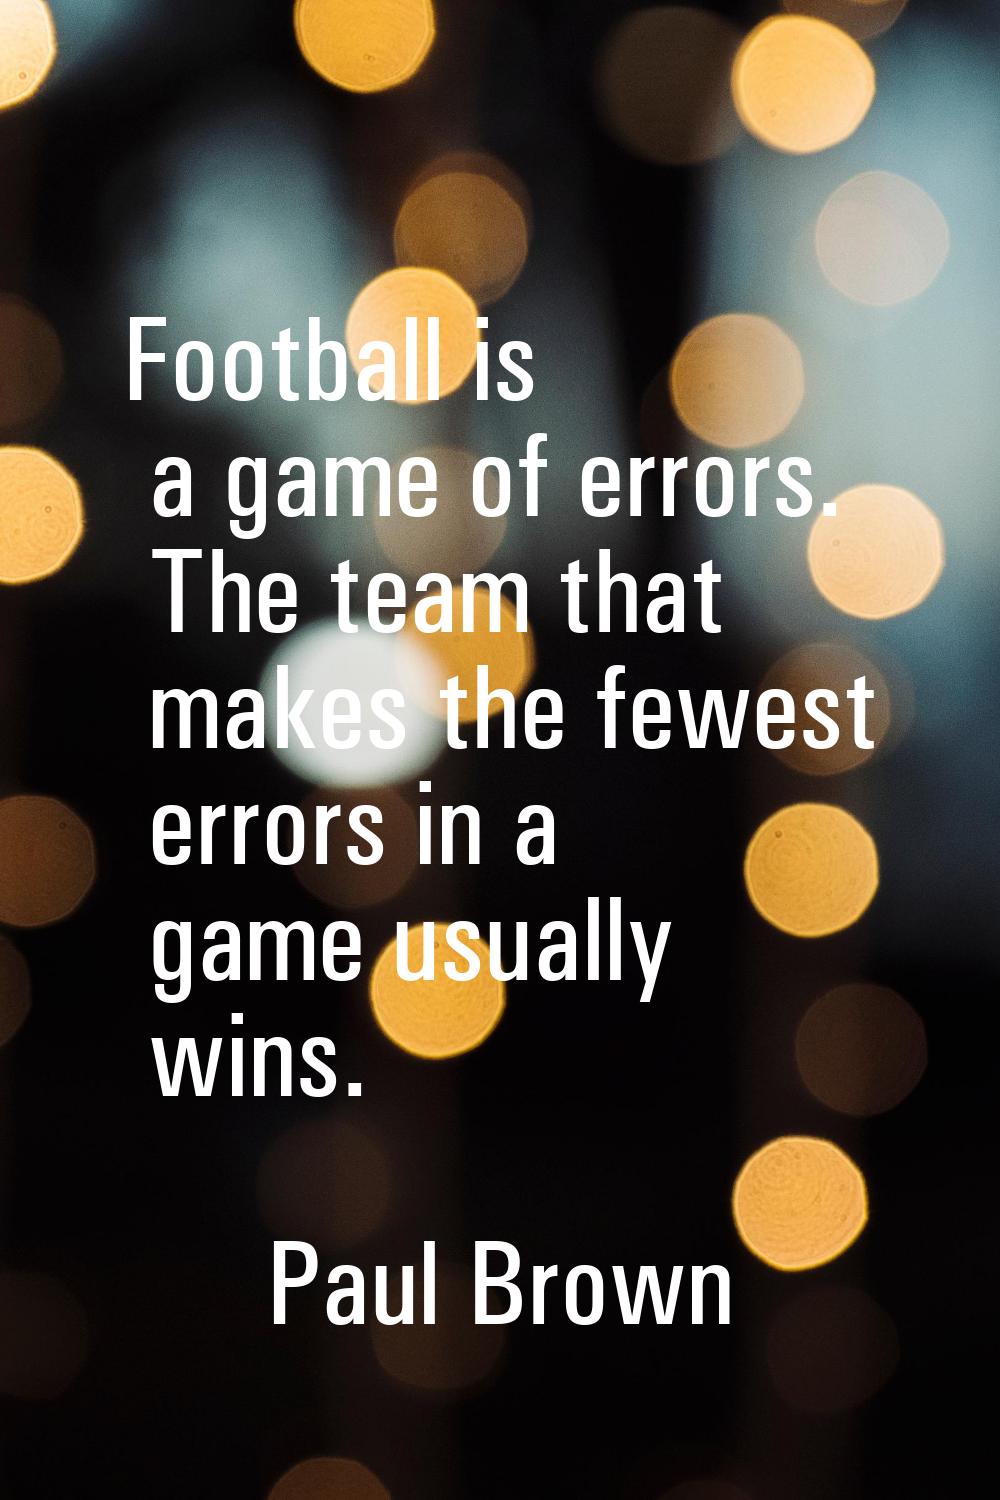 Football is a game of errors. The team that makes the fewest errors in a game usually wins.